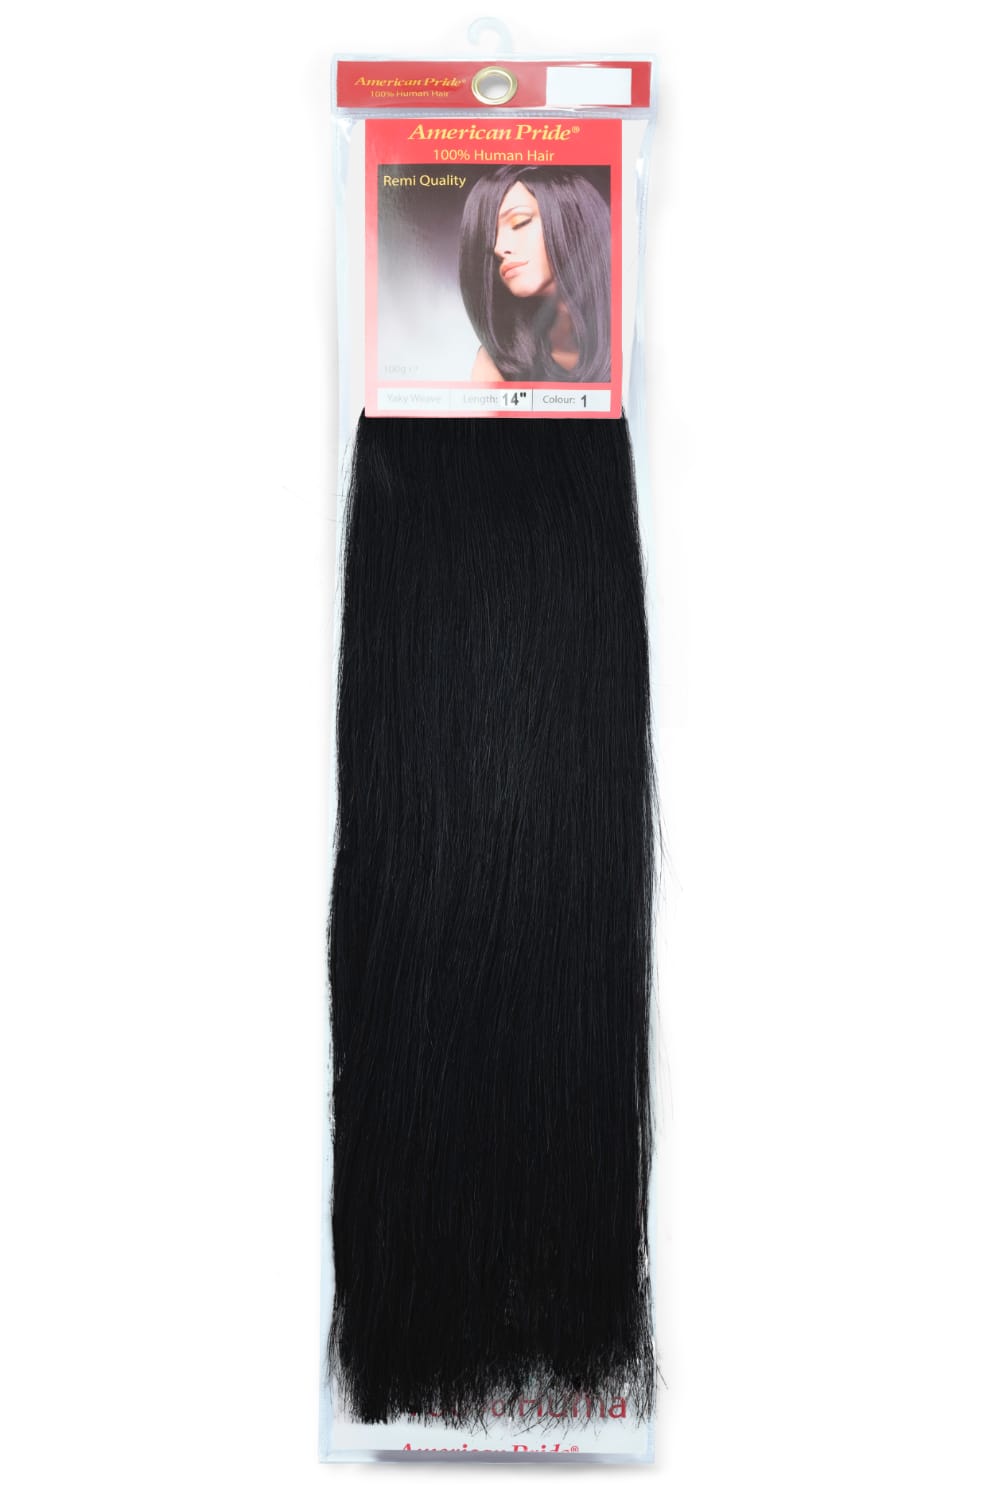 Yaki Silky Weave 14 Inch Jet Black 1 - Beauty Hair Products LtdHair Extensions